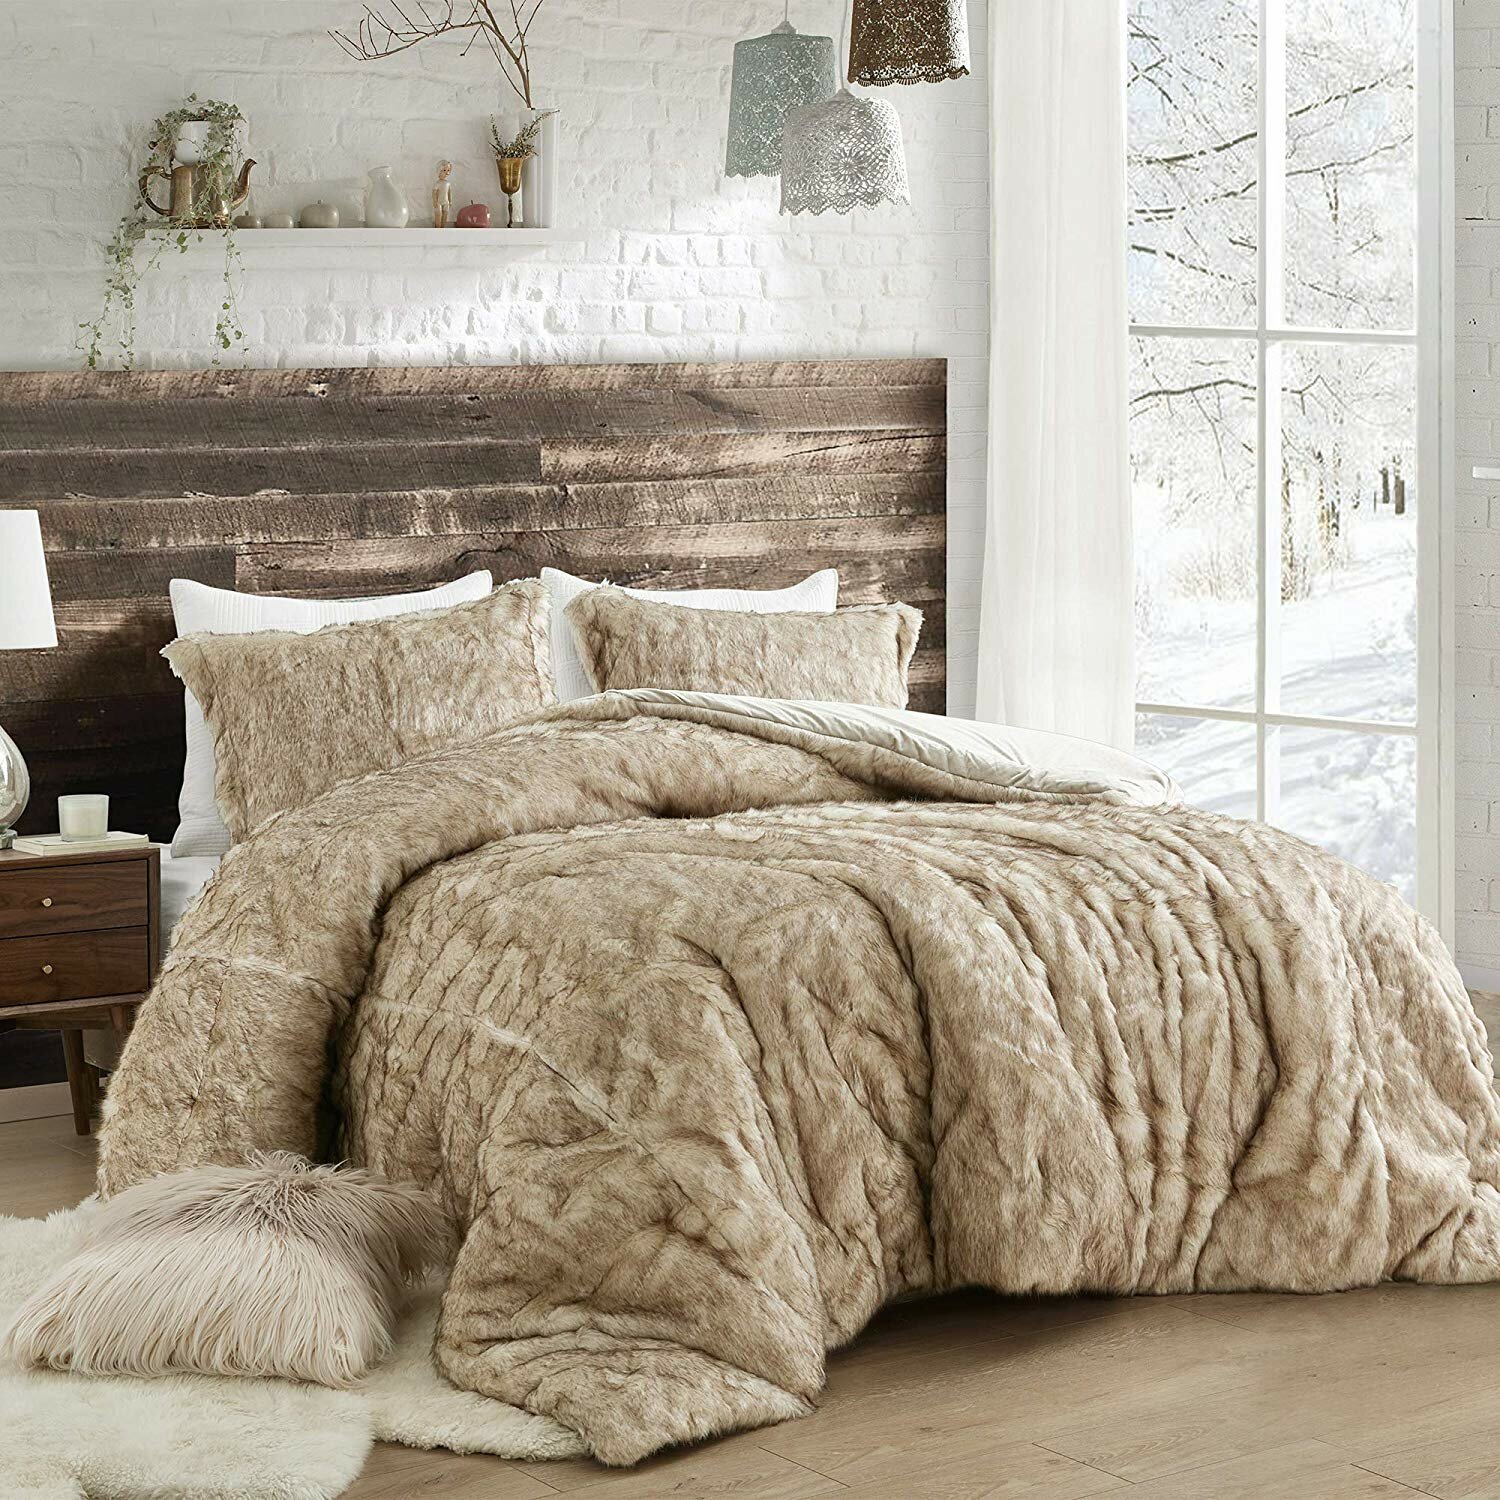 Tiger Lion - Coma Inducer Oversized Comforter - Light Fawn - Queen